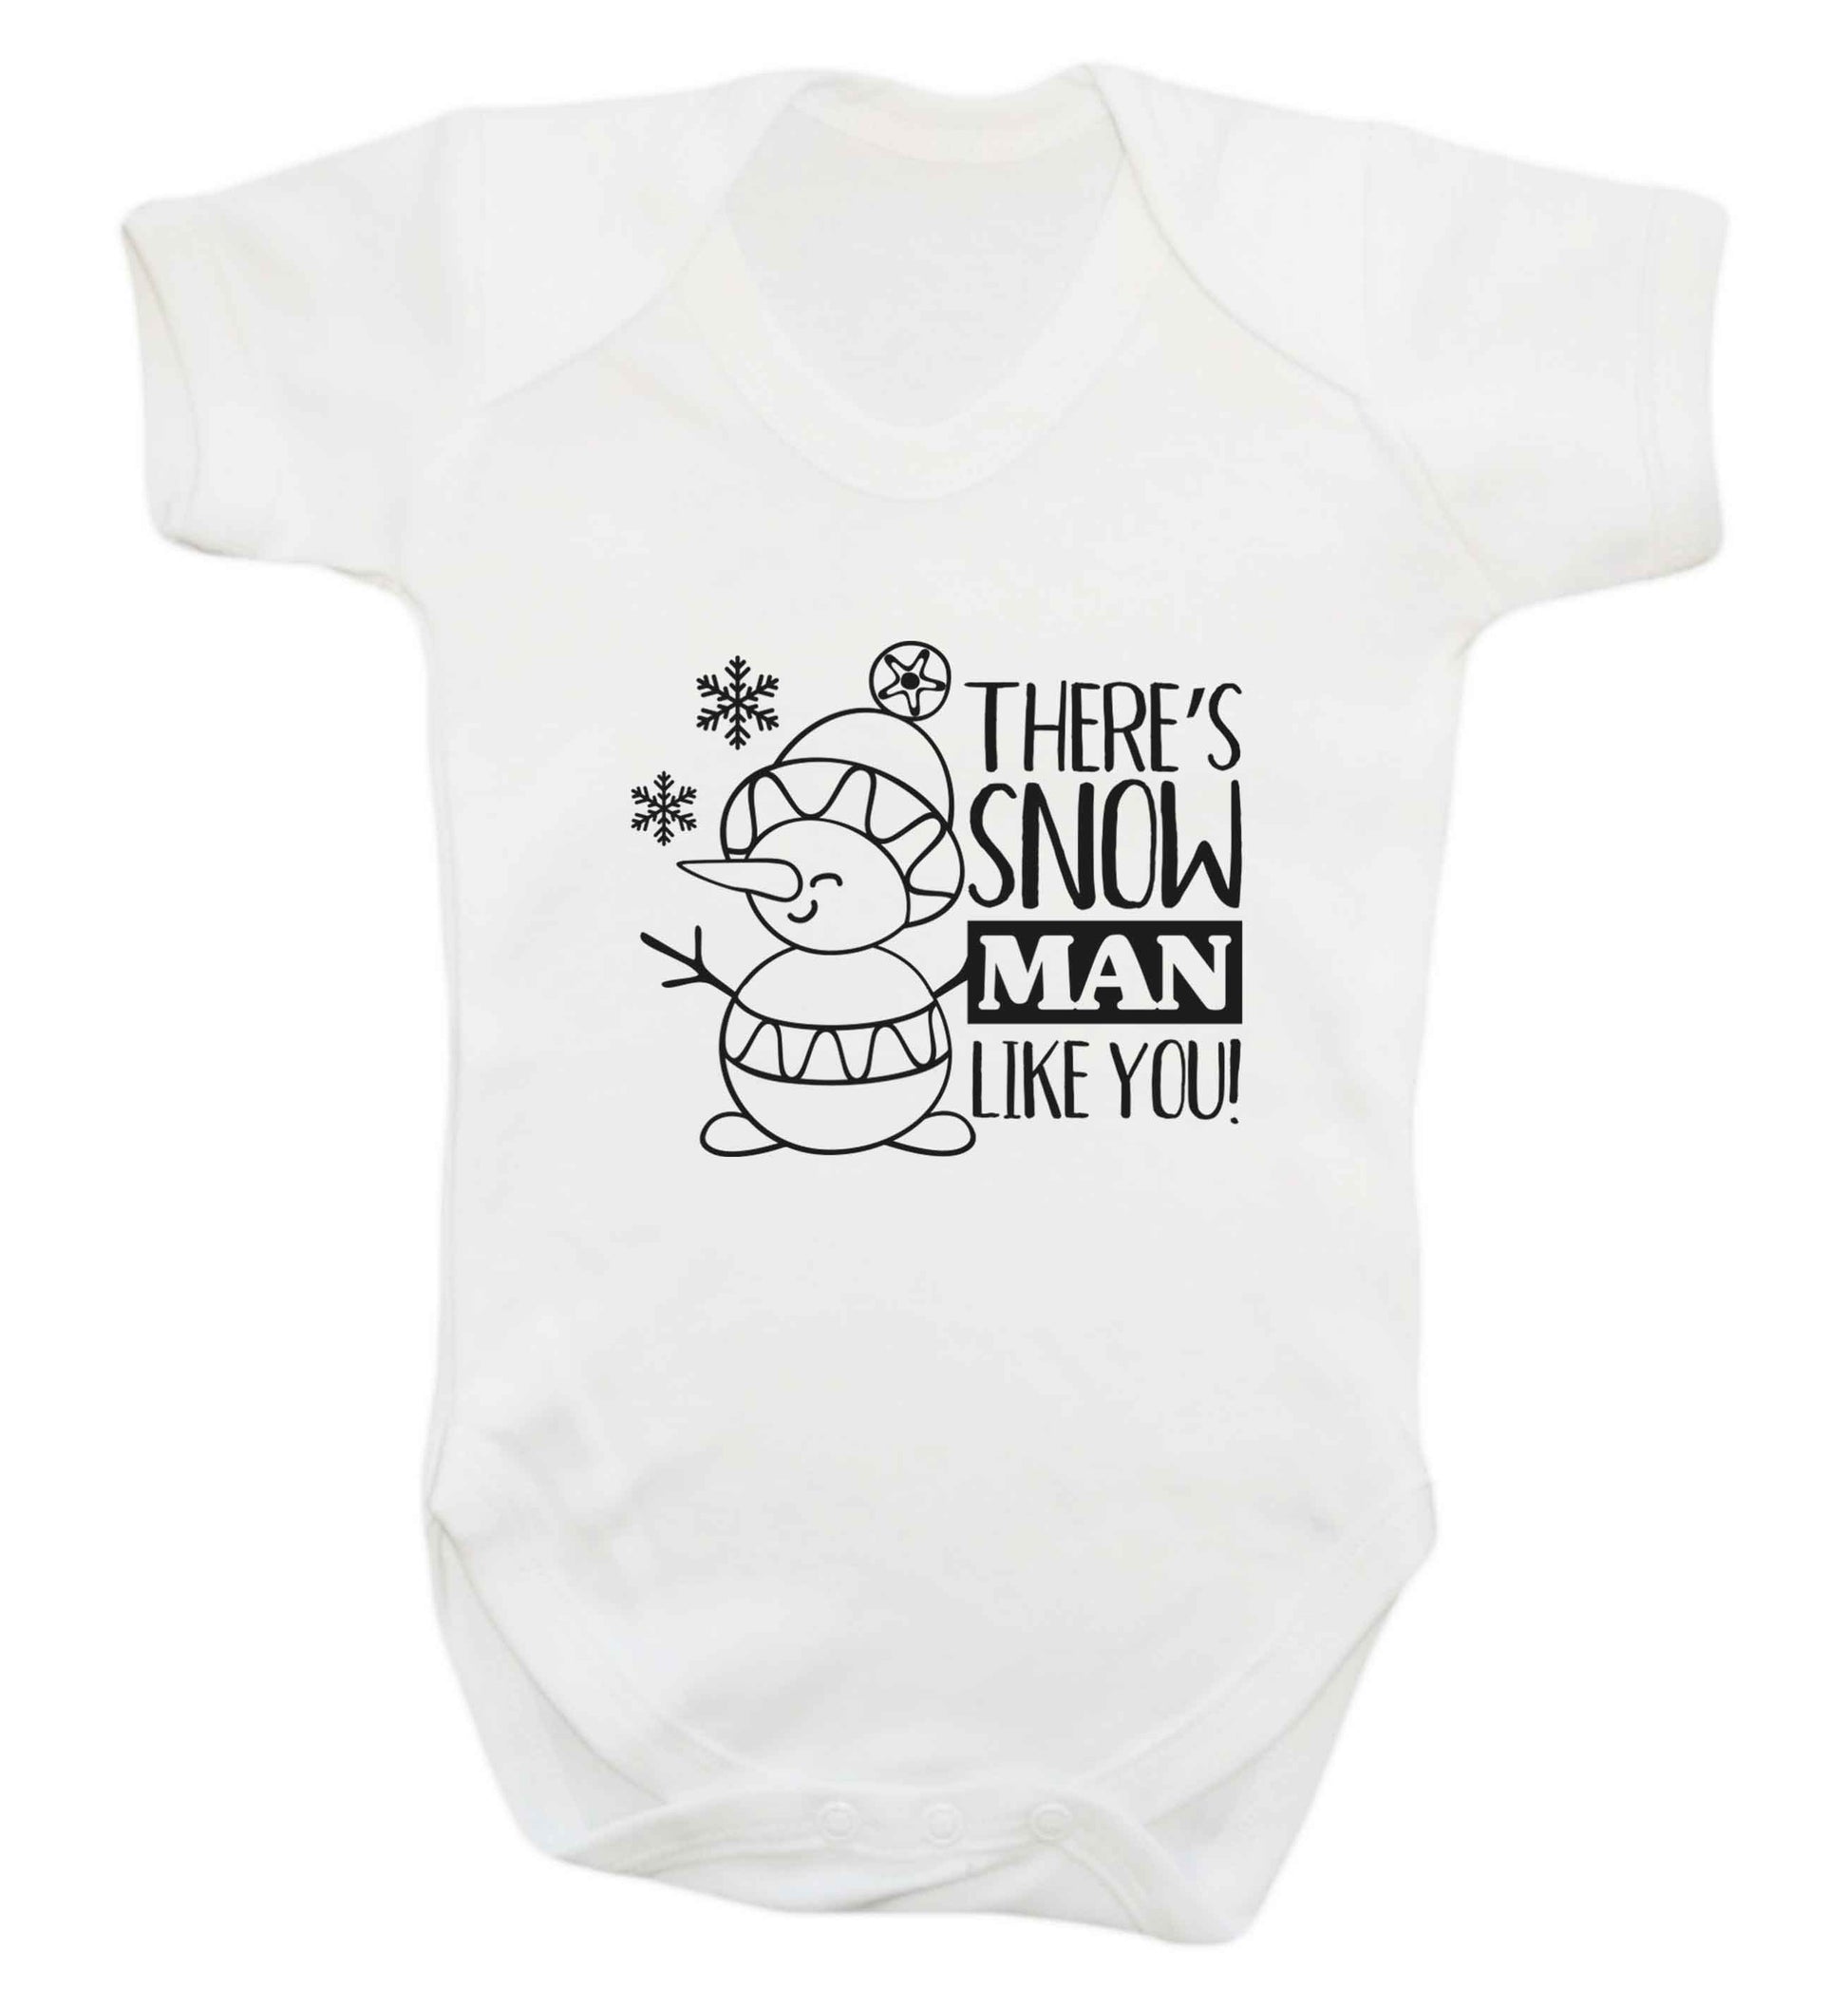 There's snow man like you baby vest white 18-24 months